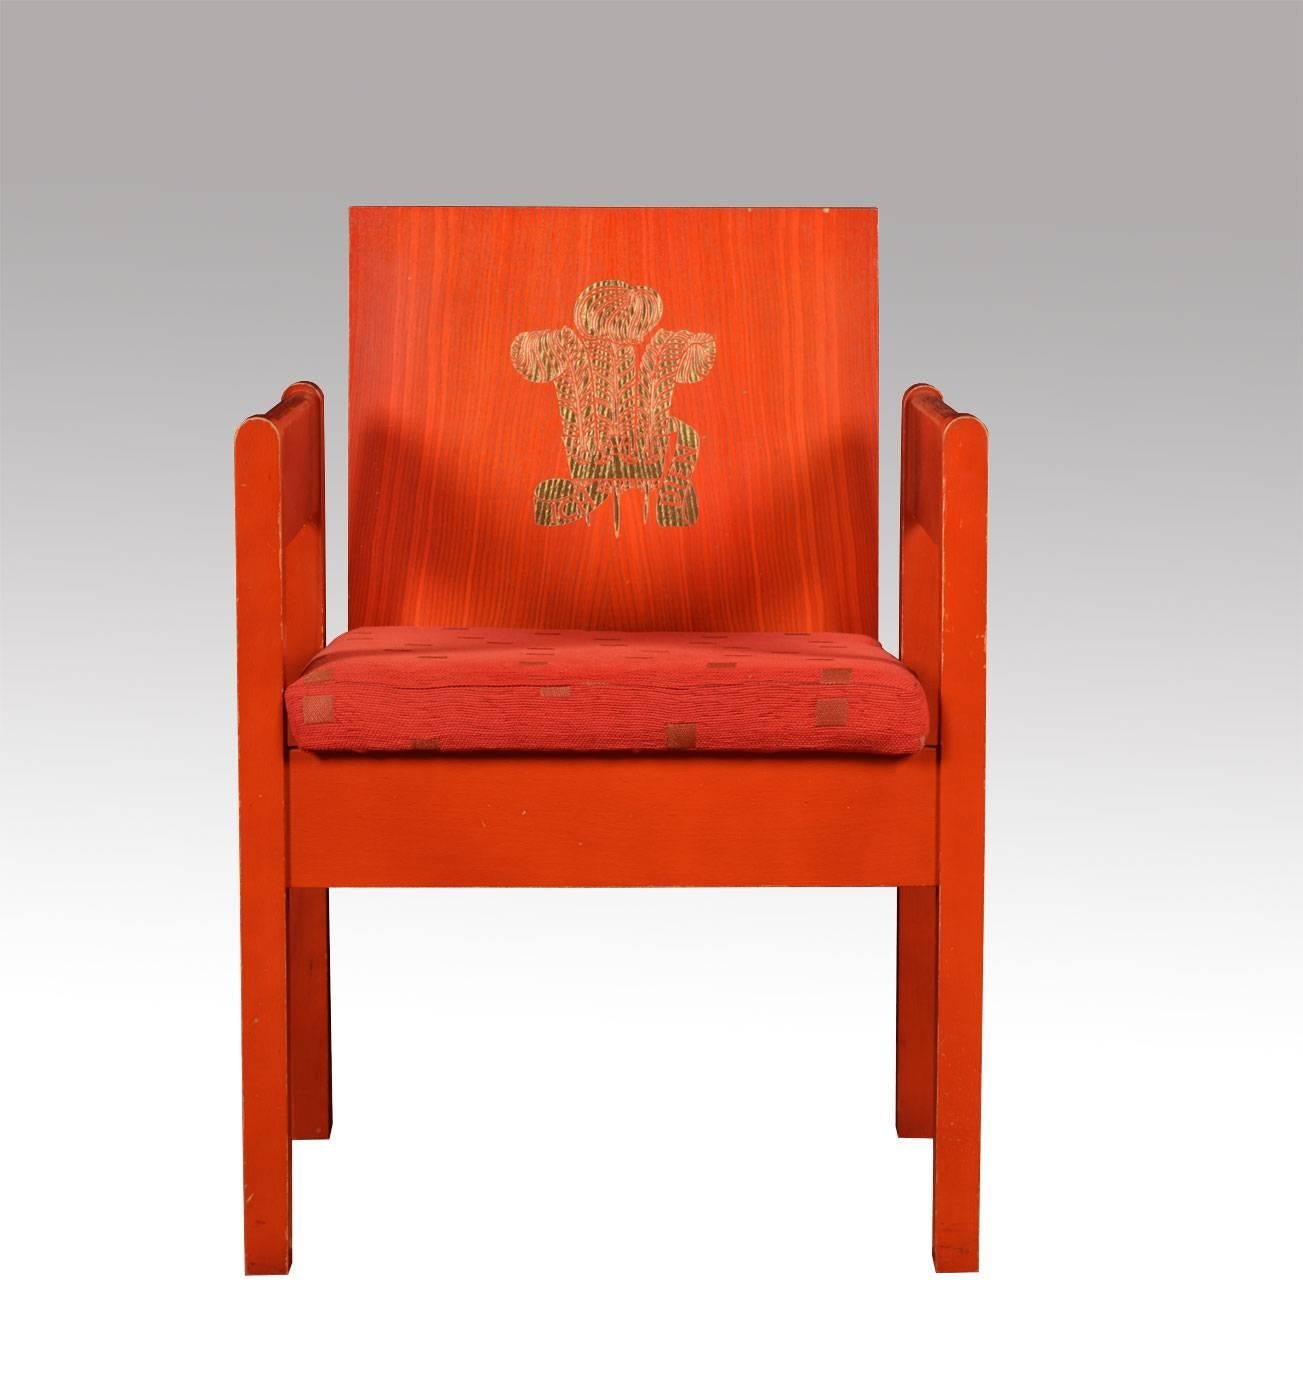 Pair of Prince Charles investiture chairs designed in 1969 by Lord Snowdon.
Of ash laminate, painted red and gilt with Prince of Wales feathers and his motto ICH DIEN [I serve], the seats upholstered in fabric.

Dimensions:

Height 30.5 inches,